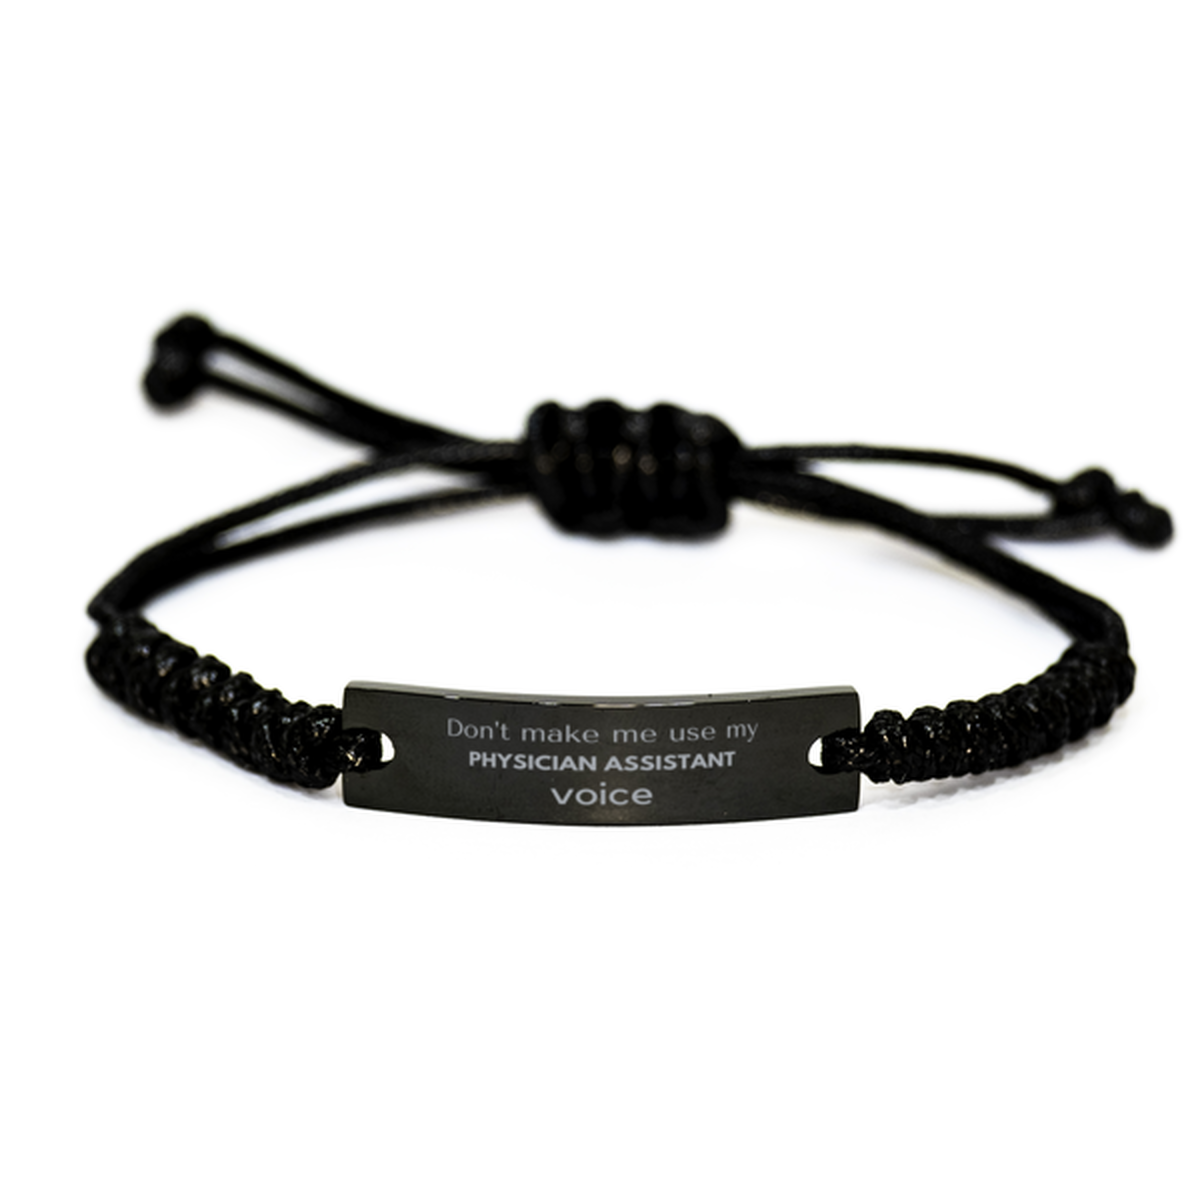 Don't make me use my Physician Assistant voice, Sarcasm Physician Assistant Gifts, Christmas Physician Assistant Black Rope Bracelet Birthday Unique Gifts For Physician Assistant Coworkers, Men, Women, Colleague, Friends